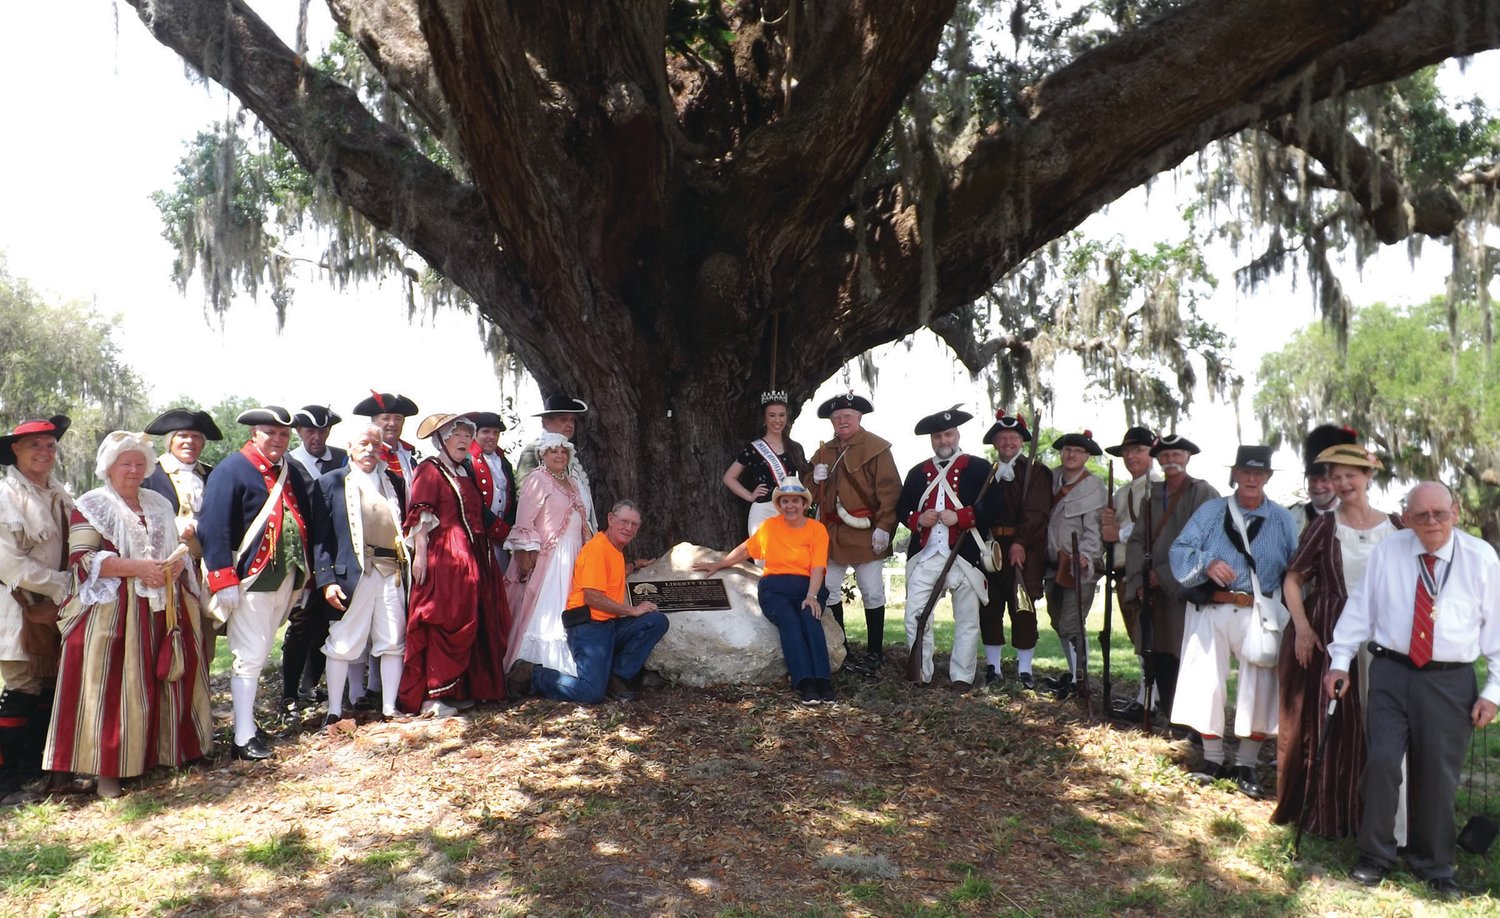 The 450-year Liberty Tree was dedicated during last year’s Heritage Festival at the Edna Pearce Lockett Estate. The tree is one of the attractions of the festival, slated this year for March 12-13.